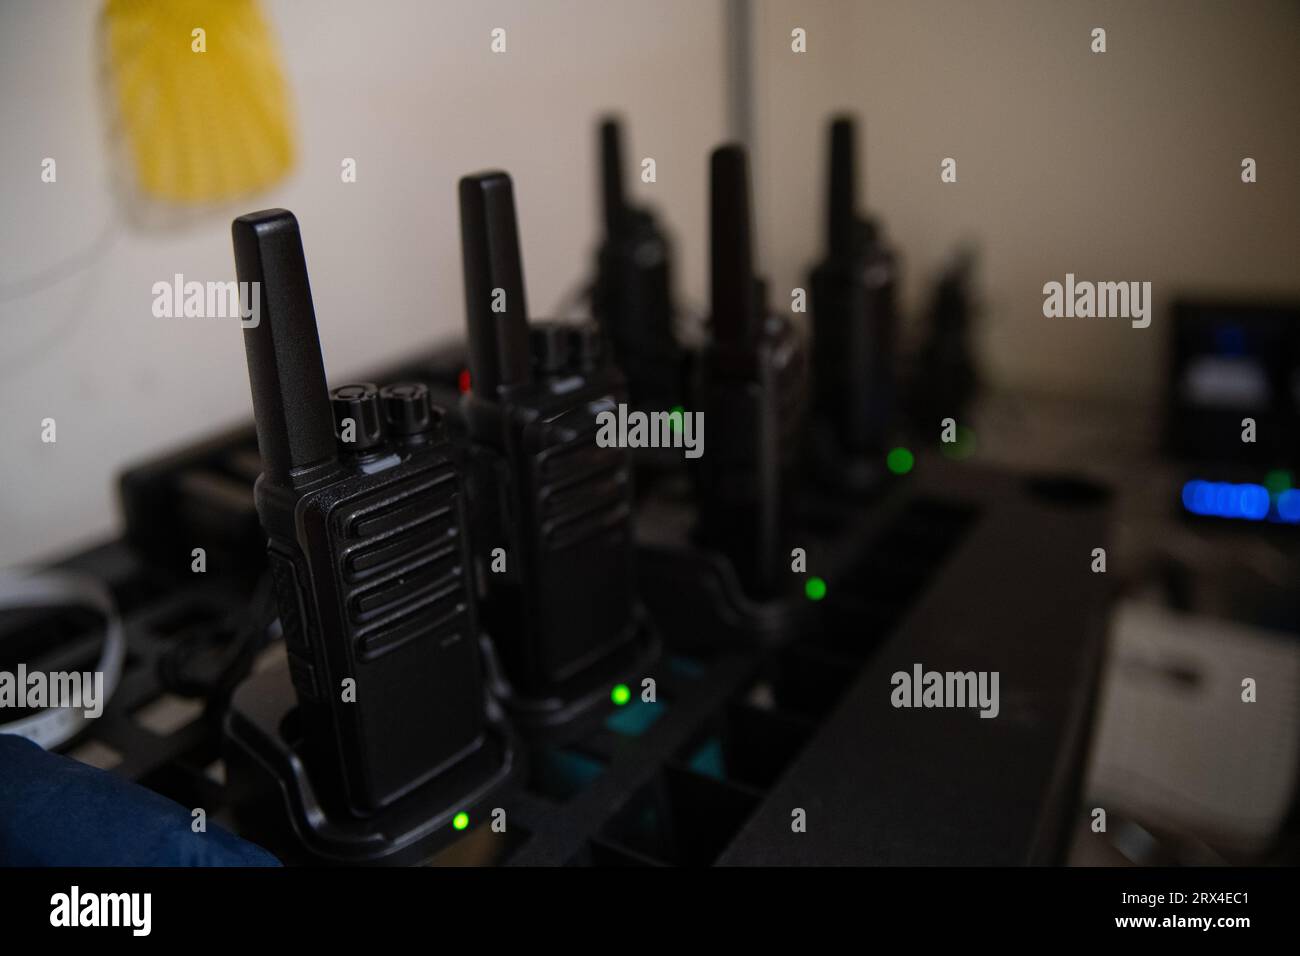 Walkie talkie radio transceiver set up in security office Stock Photo